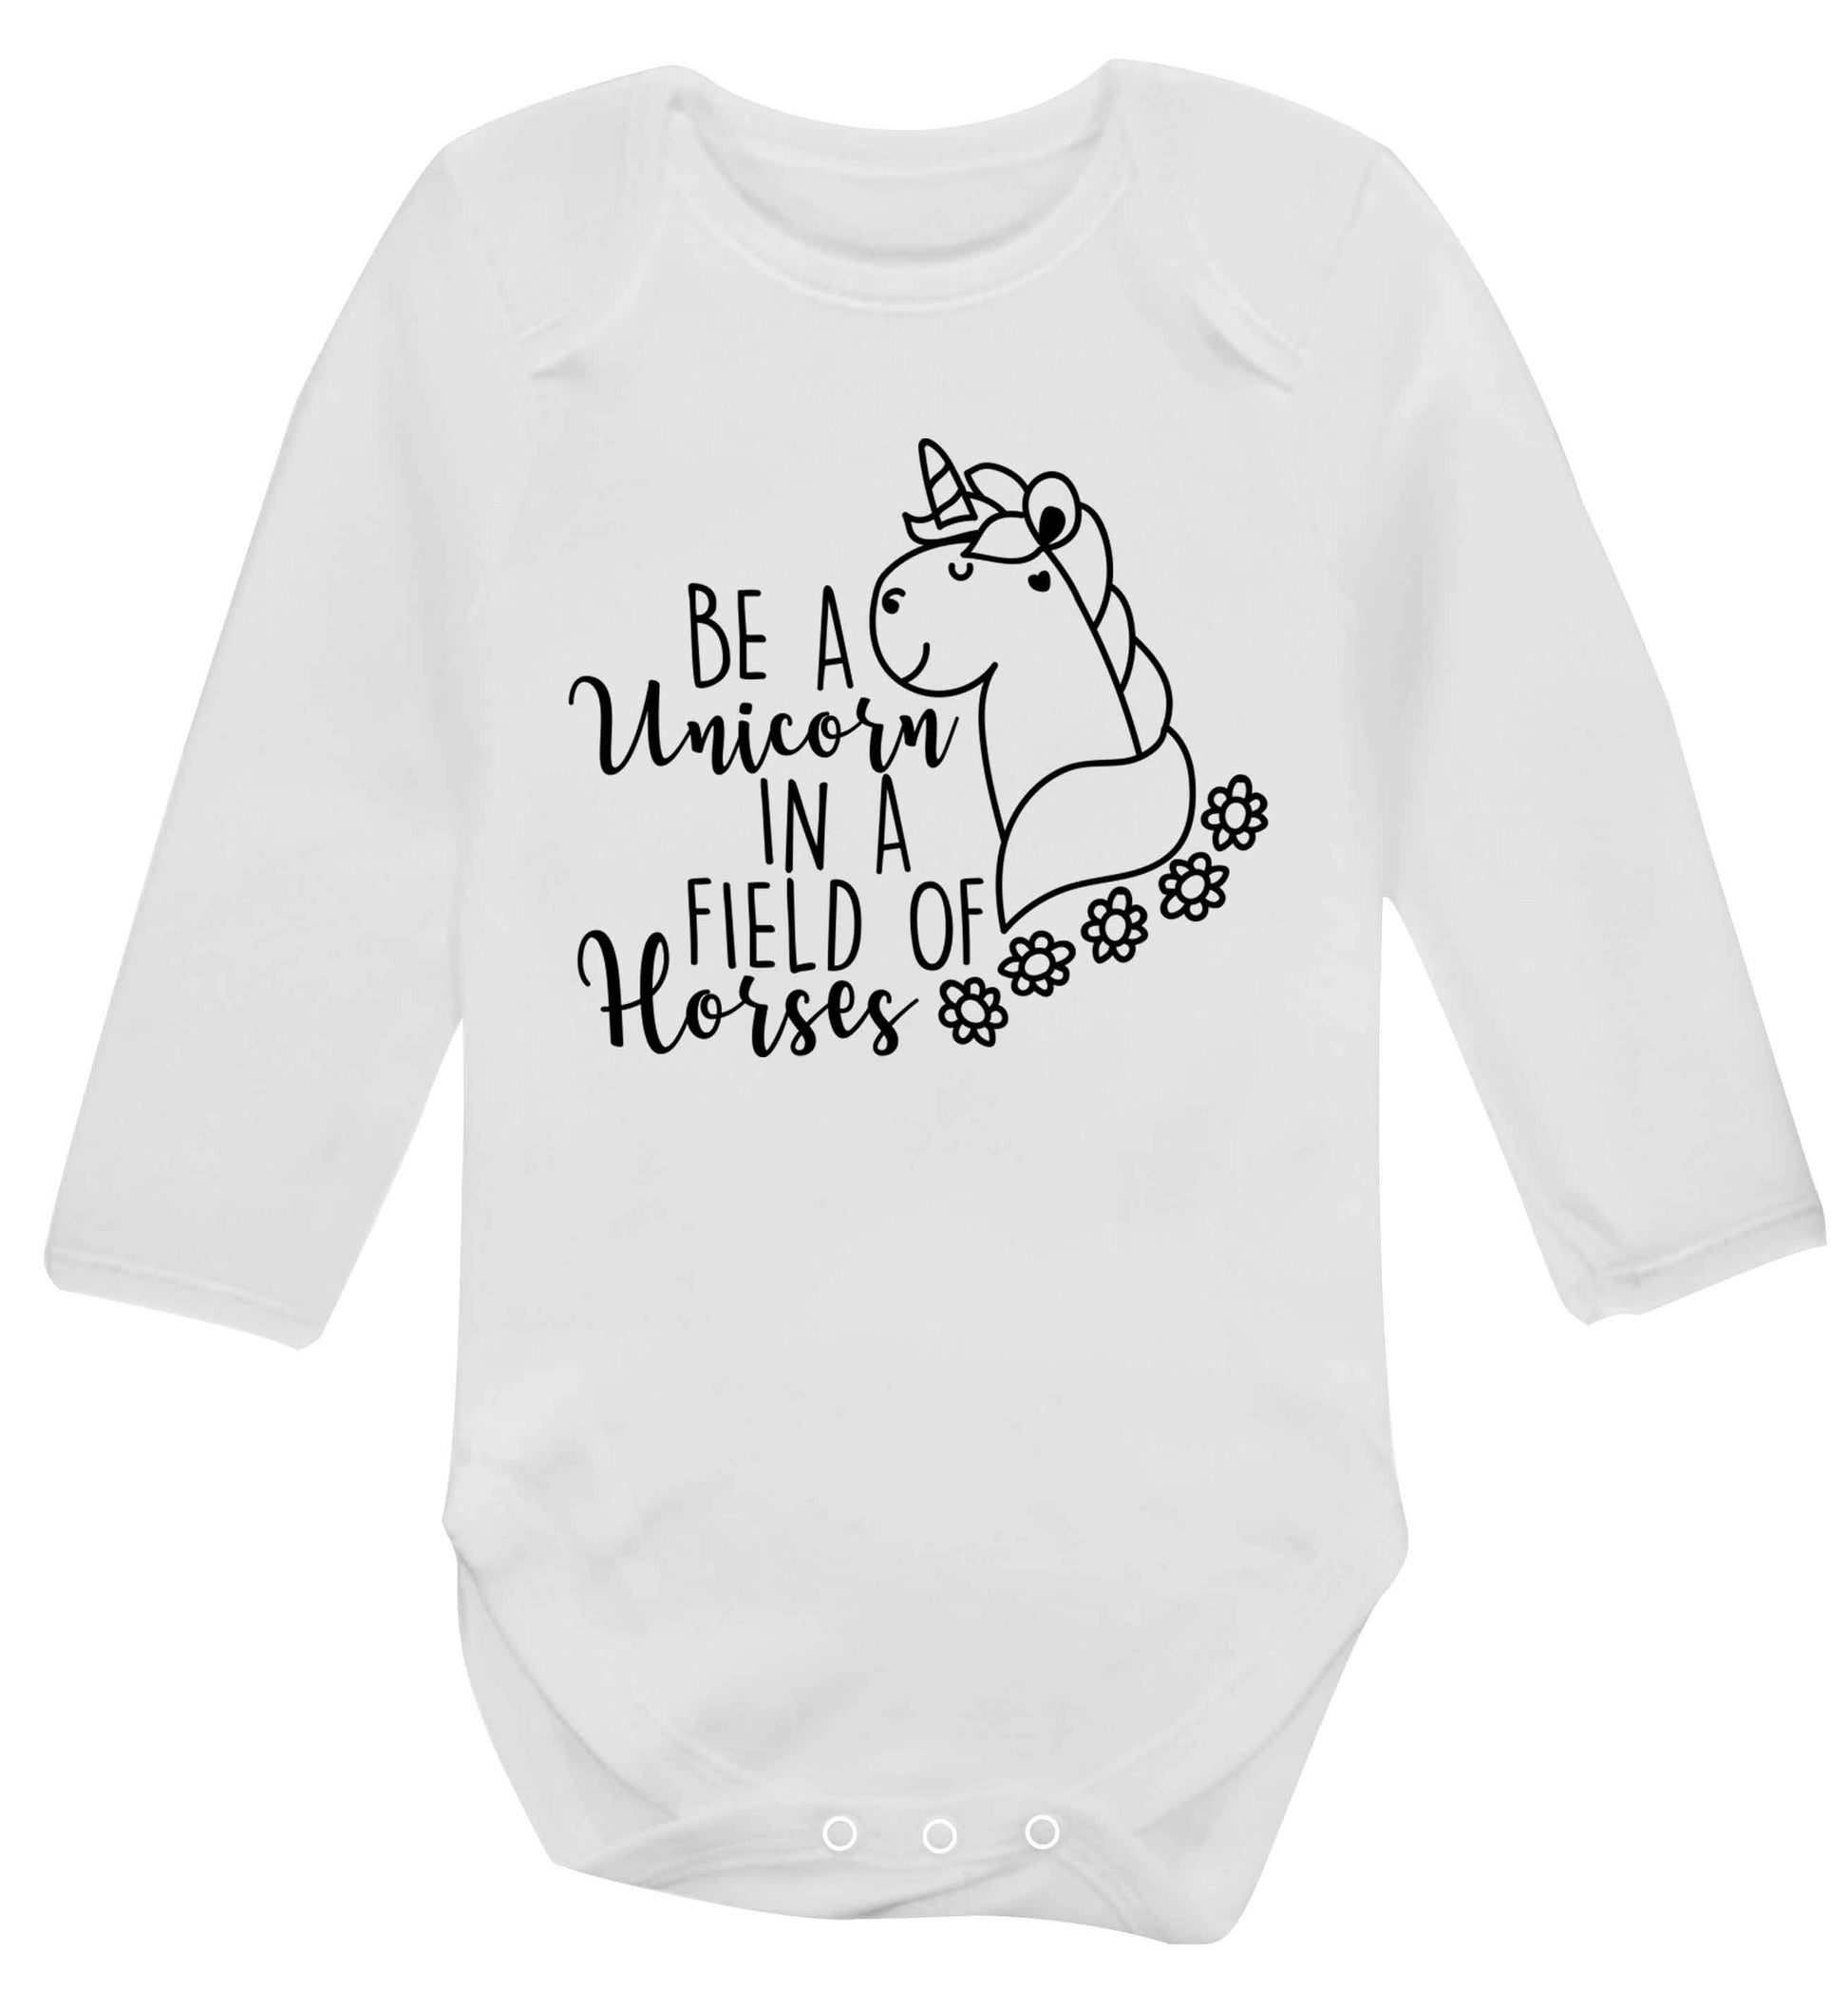 Be a unicorn in a field of horses Baby Vest long sleeved white 6-12 months